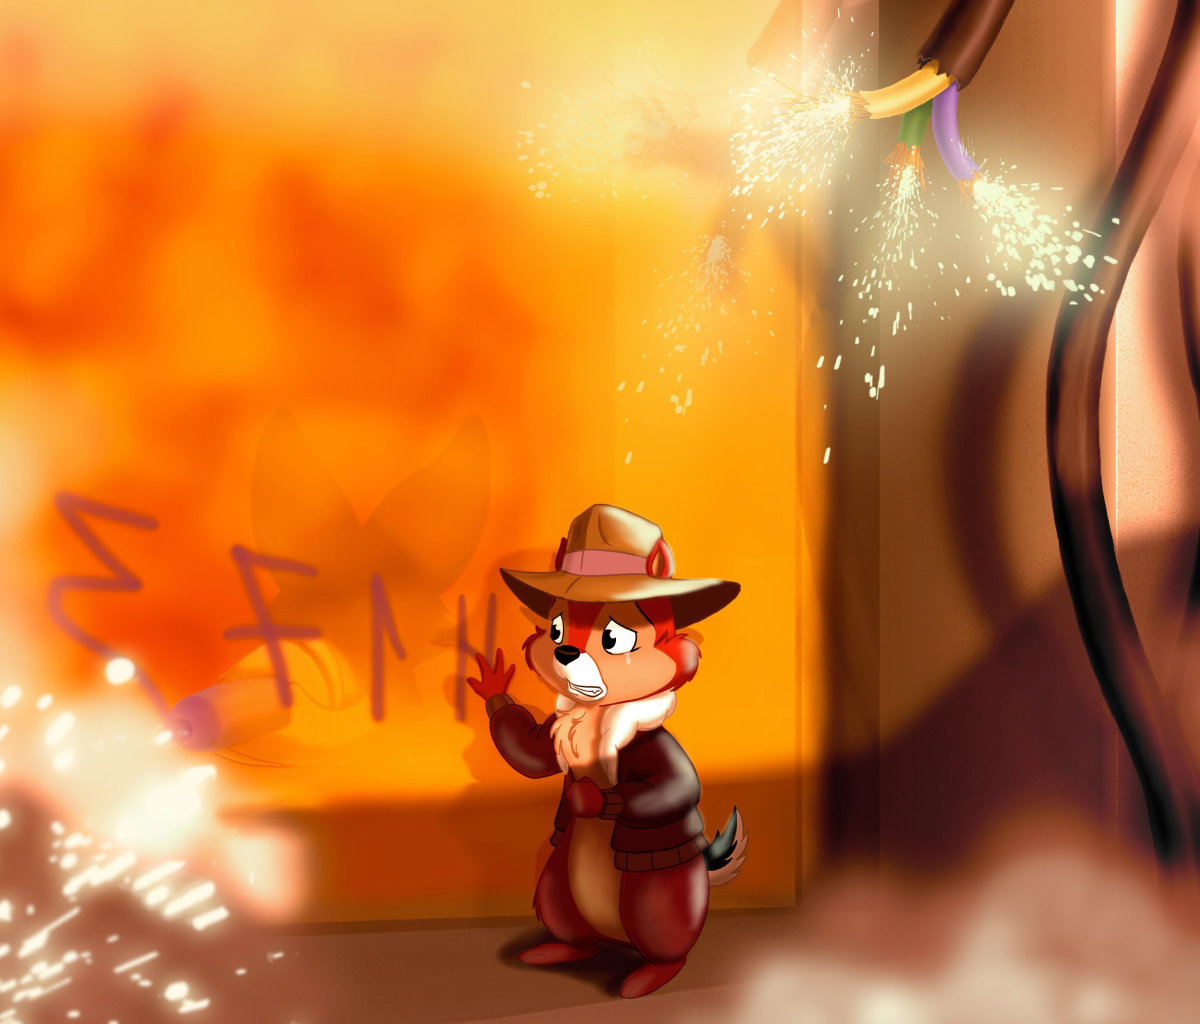 Chip and Dale Rescue Rangers 2 wallpaper 1200x1024